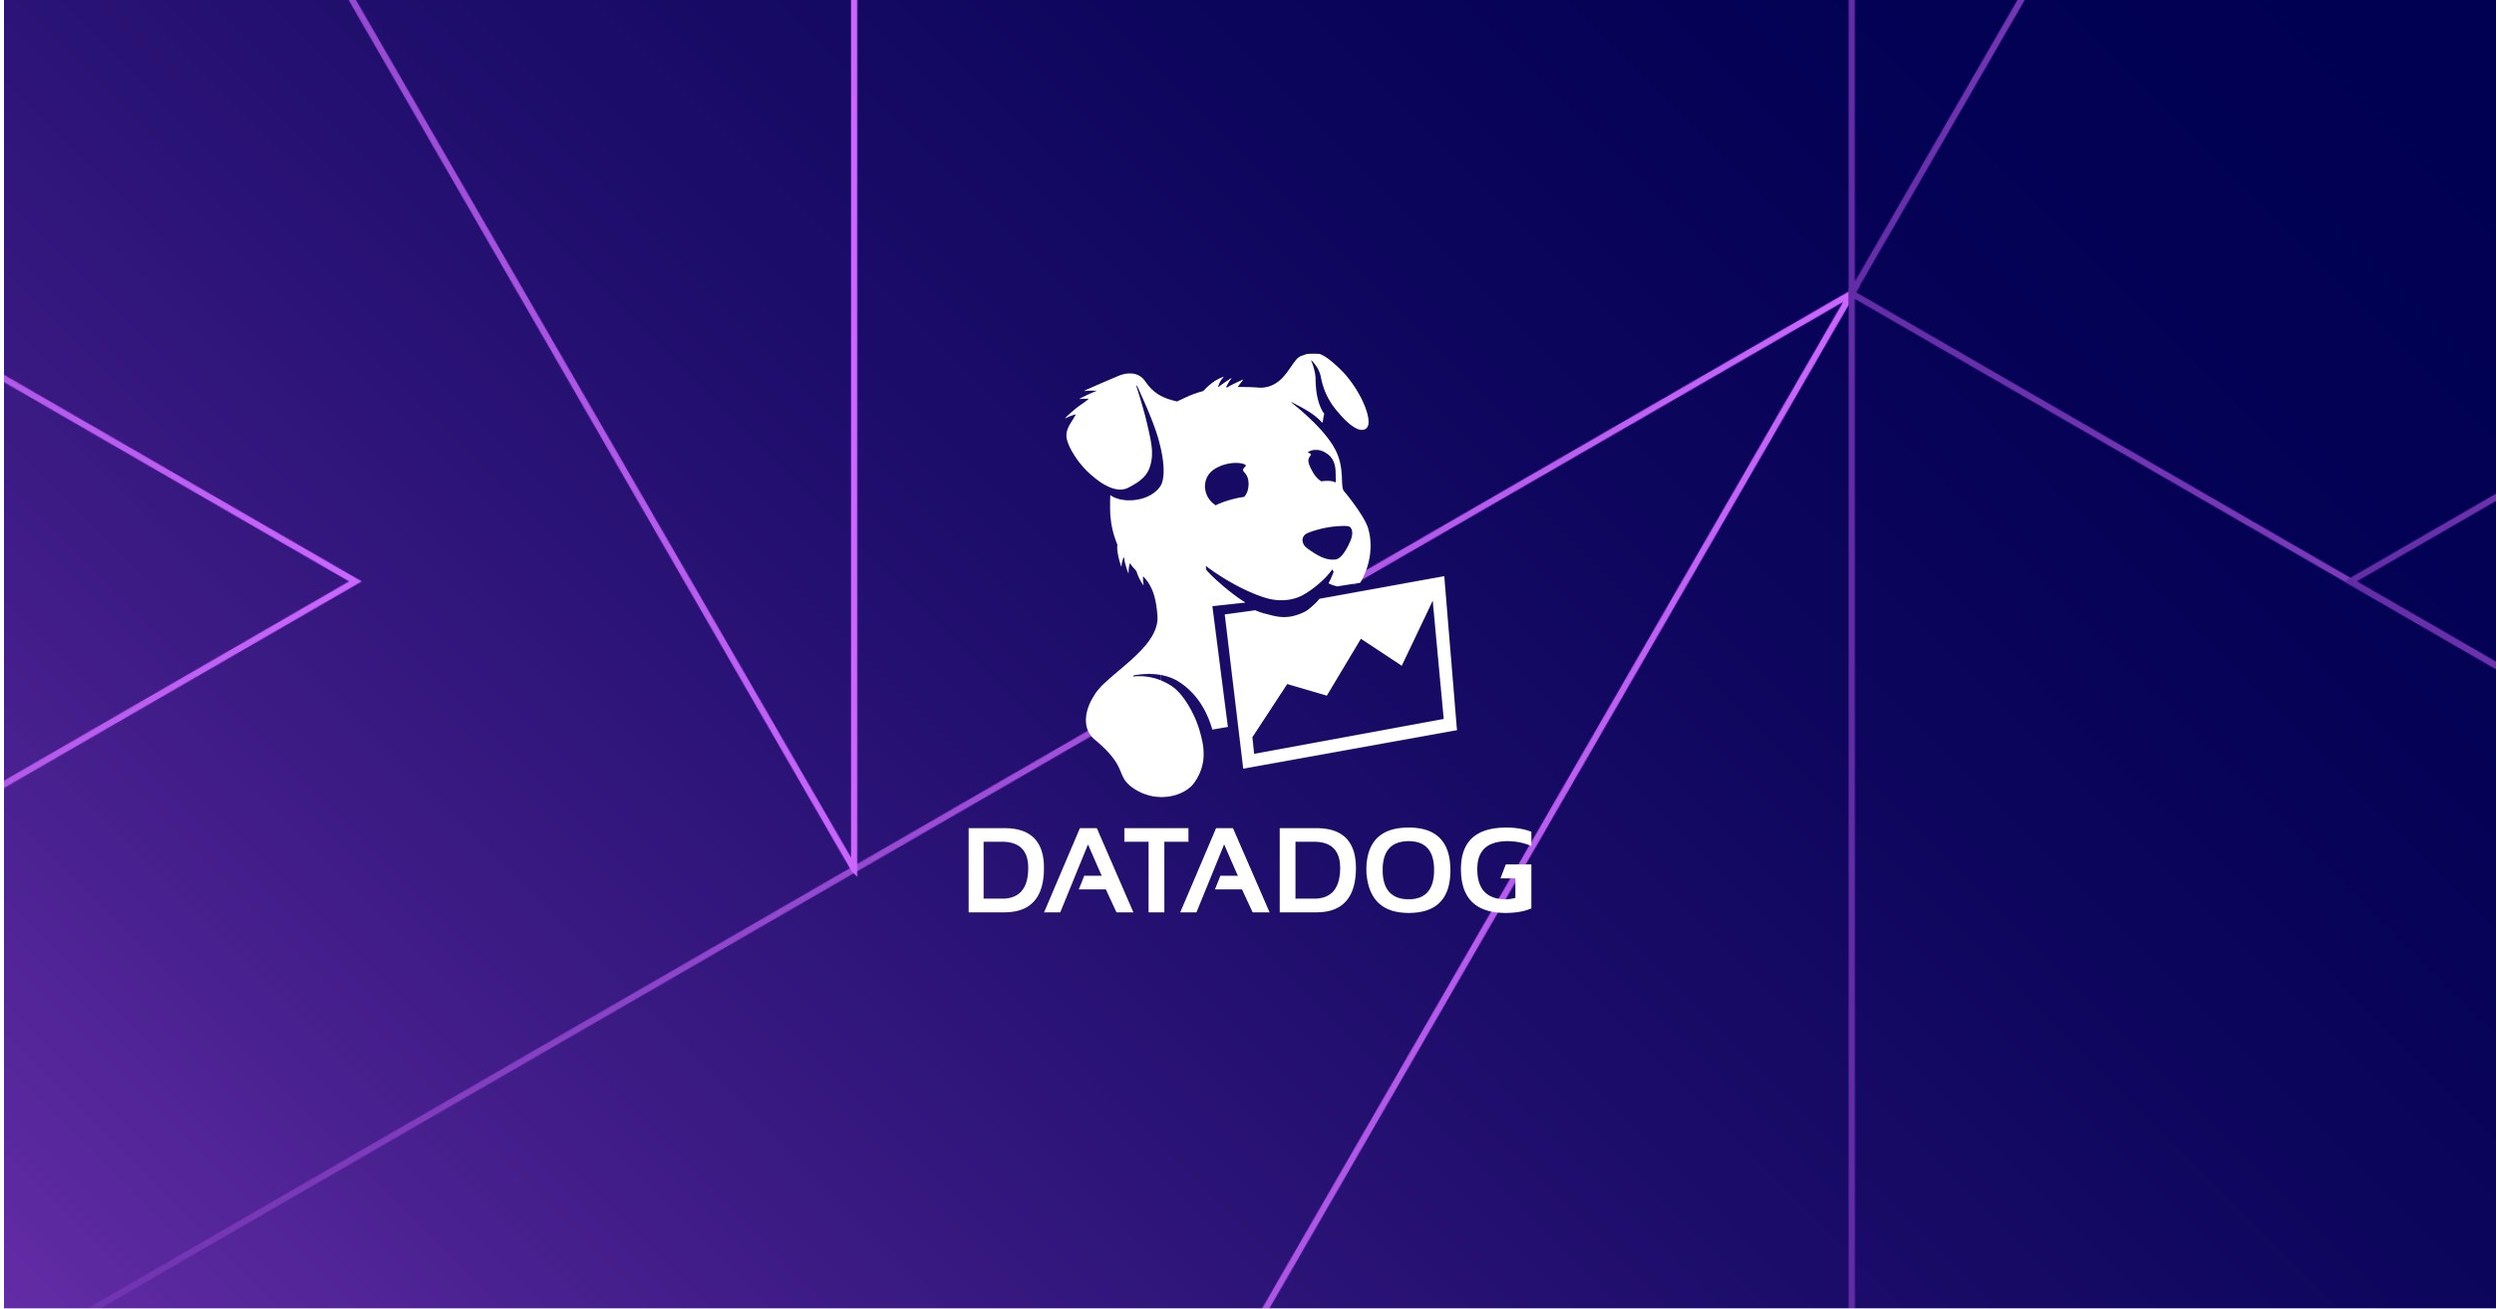 dataadog Network Management And Monitoring Software.